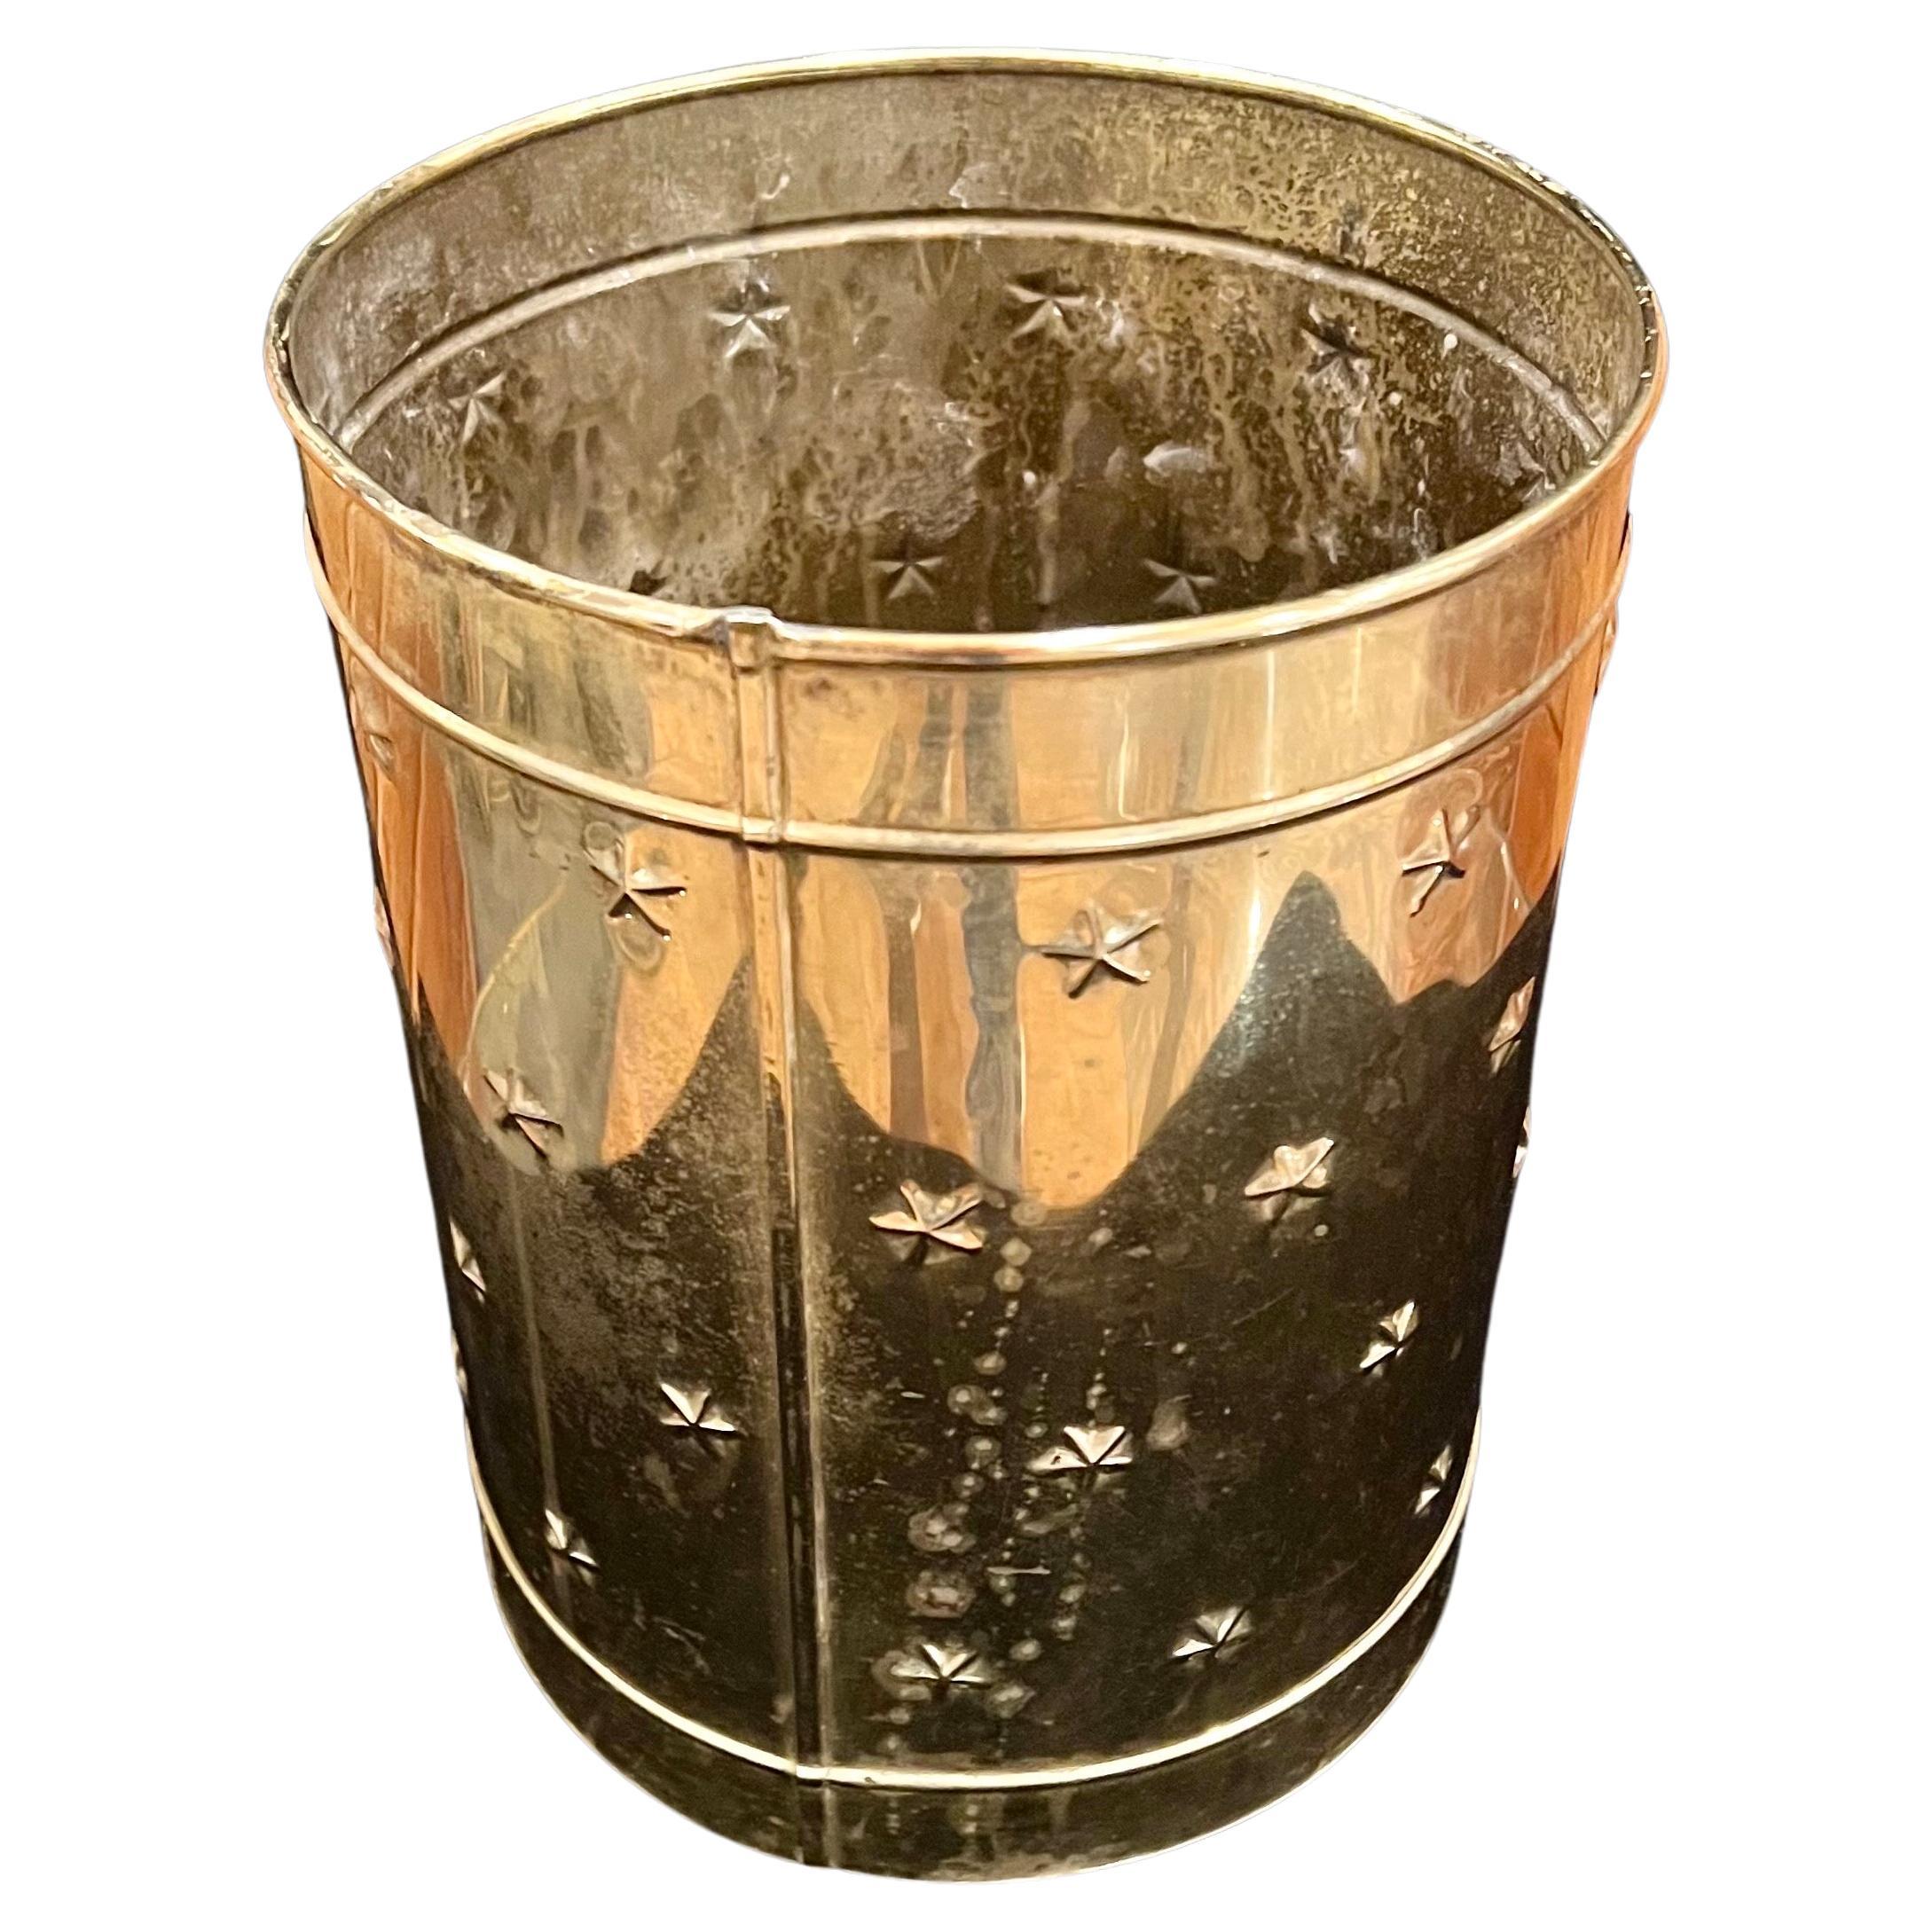 Beautiful elegant polished patinated brass cylinder waste basket or planter with stars pattern we have cleaned and polished the piece its very unique and rare.